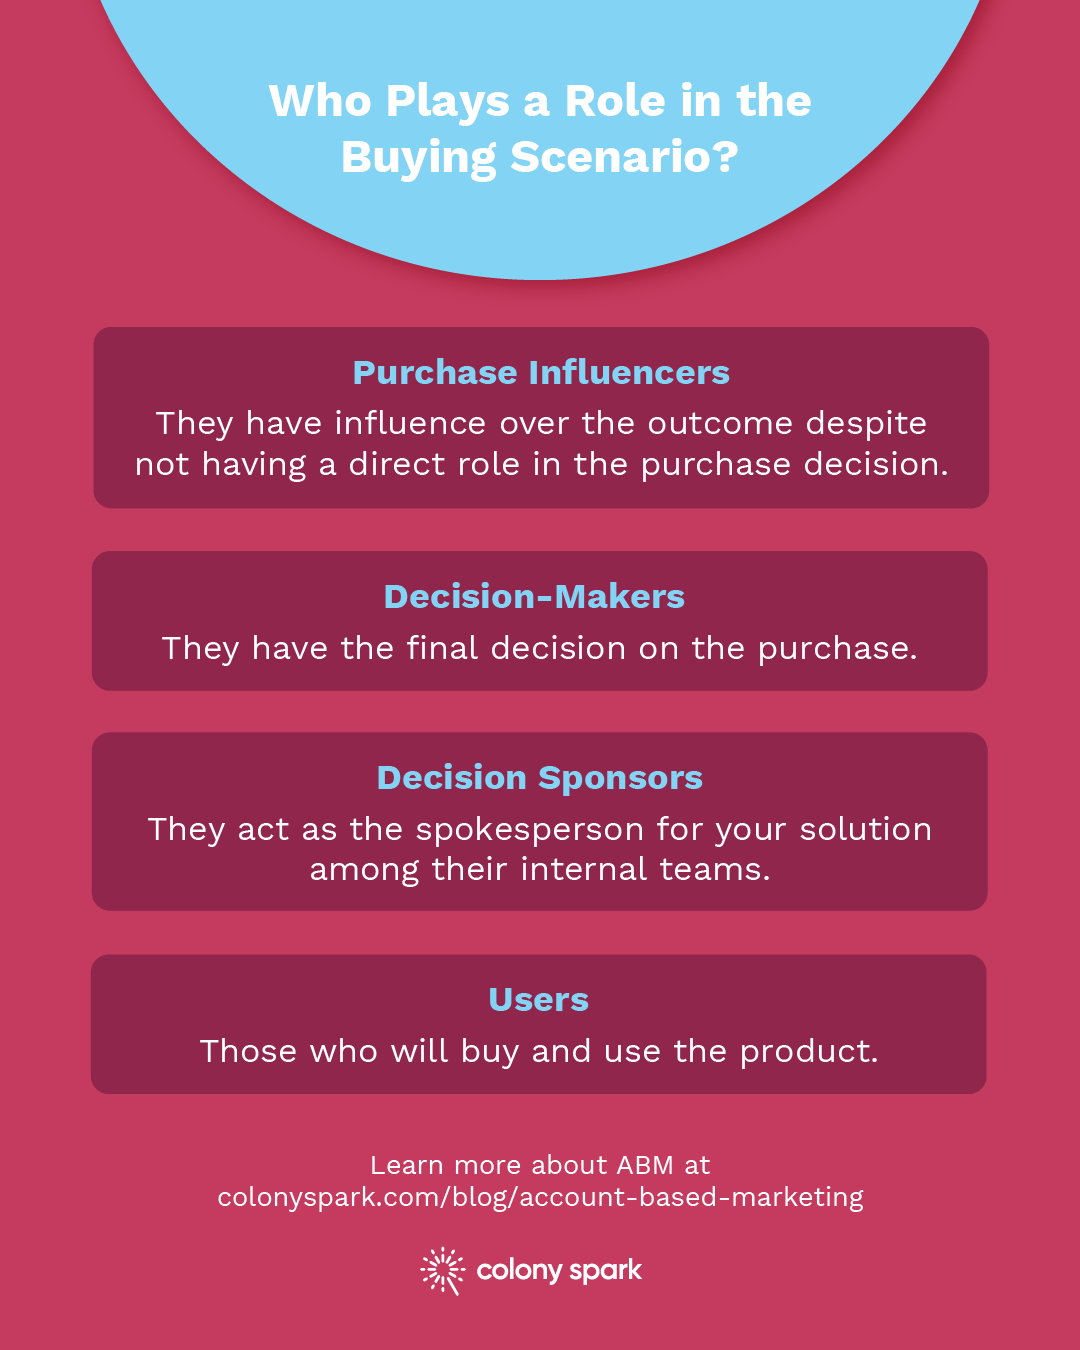 Who Plays a Role in the Buying Scenario?